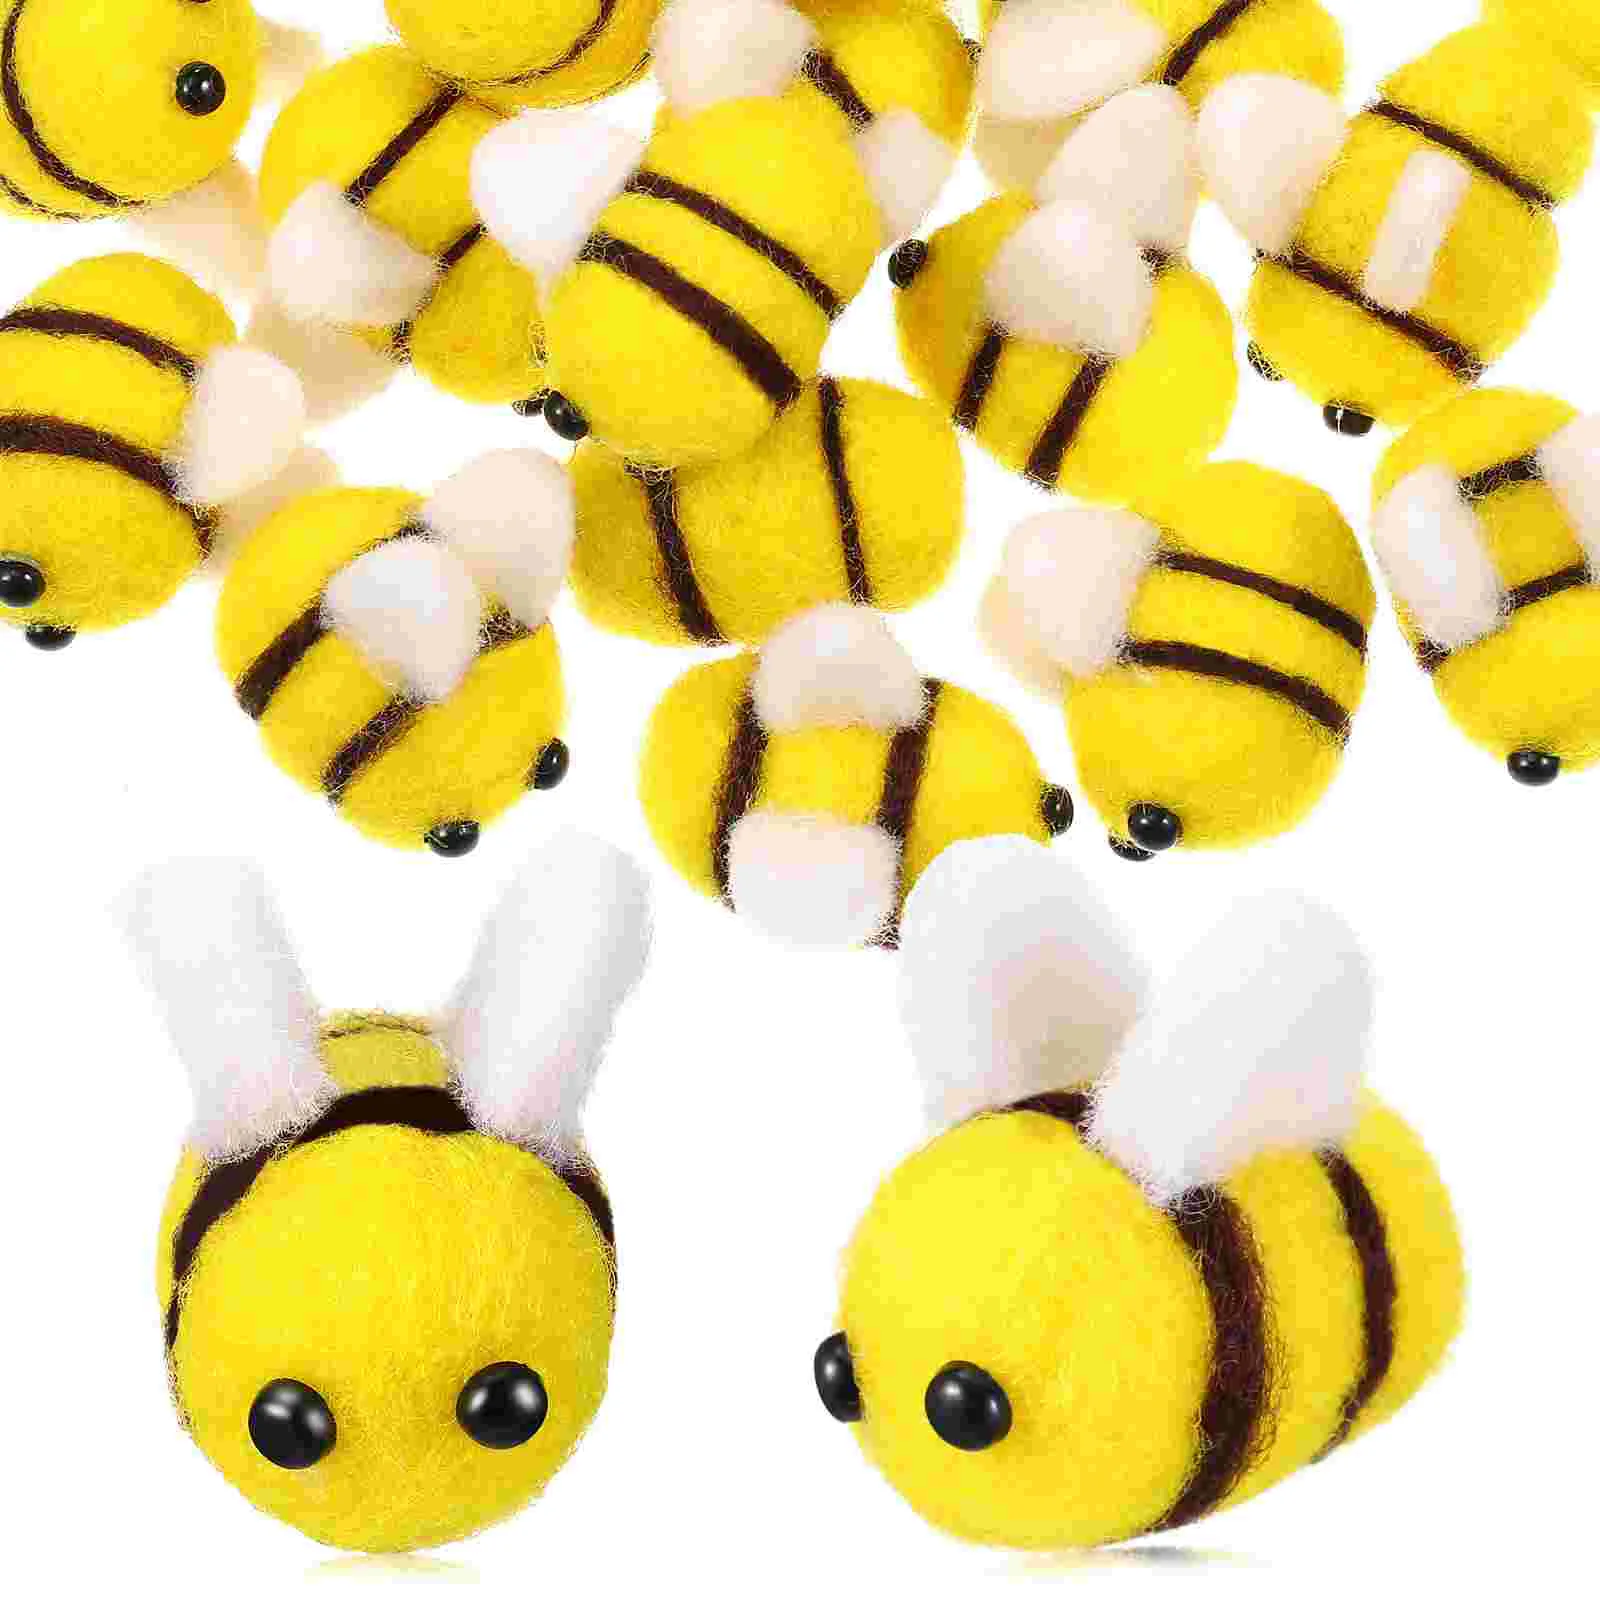 

24 Pcs Felt Bee Charms Wool Bees Suite Flatback Embellishments Balls for Crafts